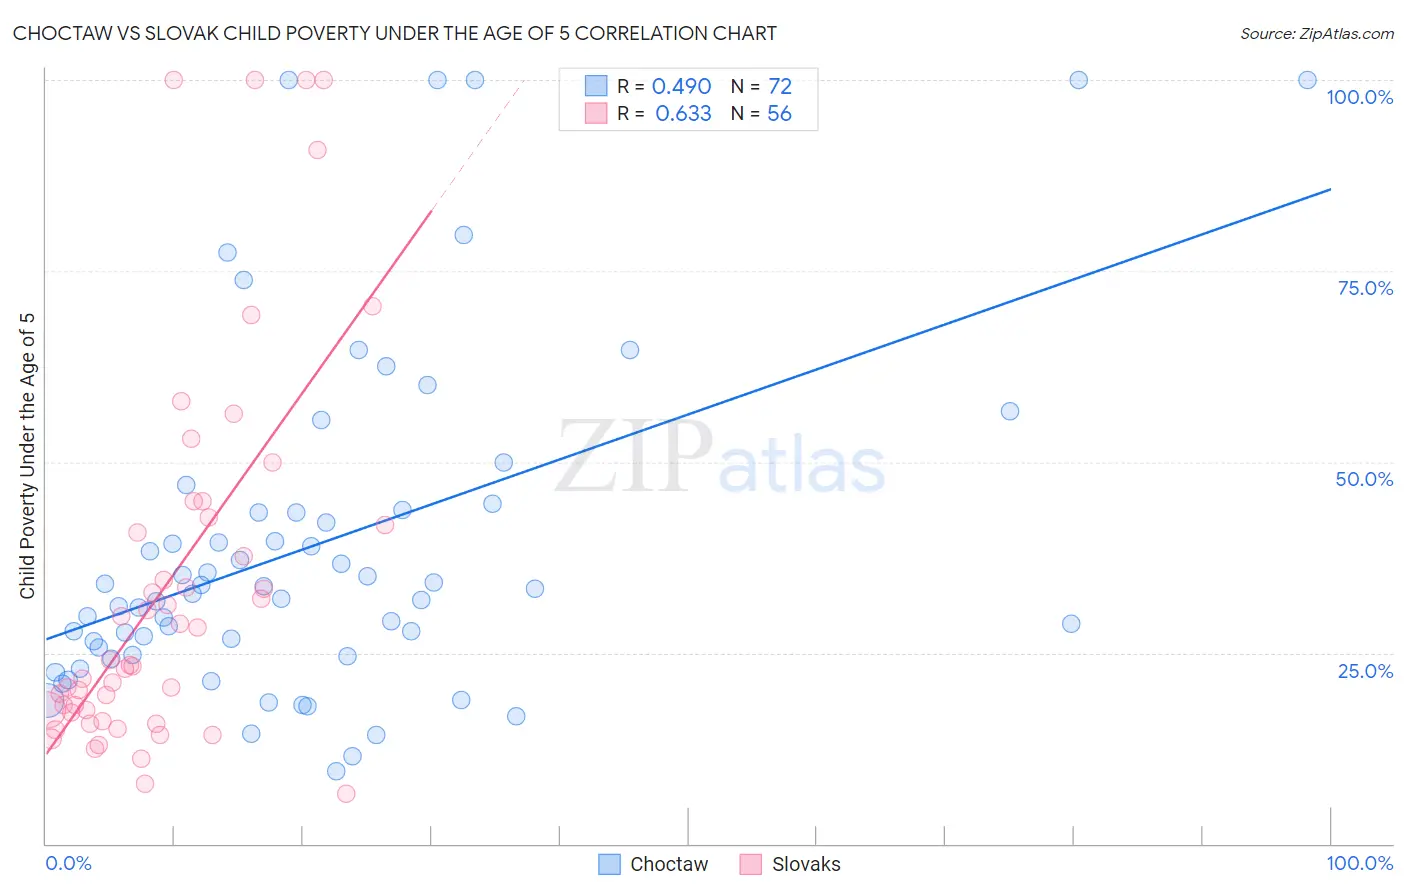 Choctaw vs Slovak Child Poverty Under the Age of 5